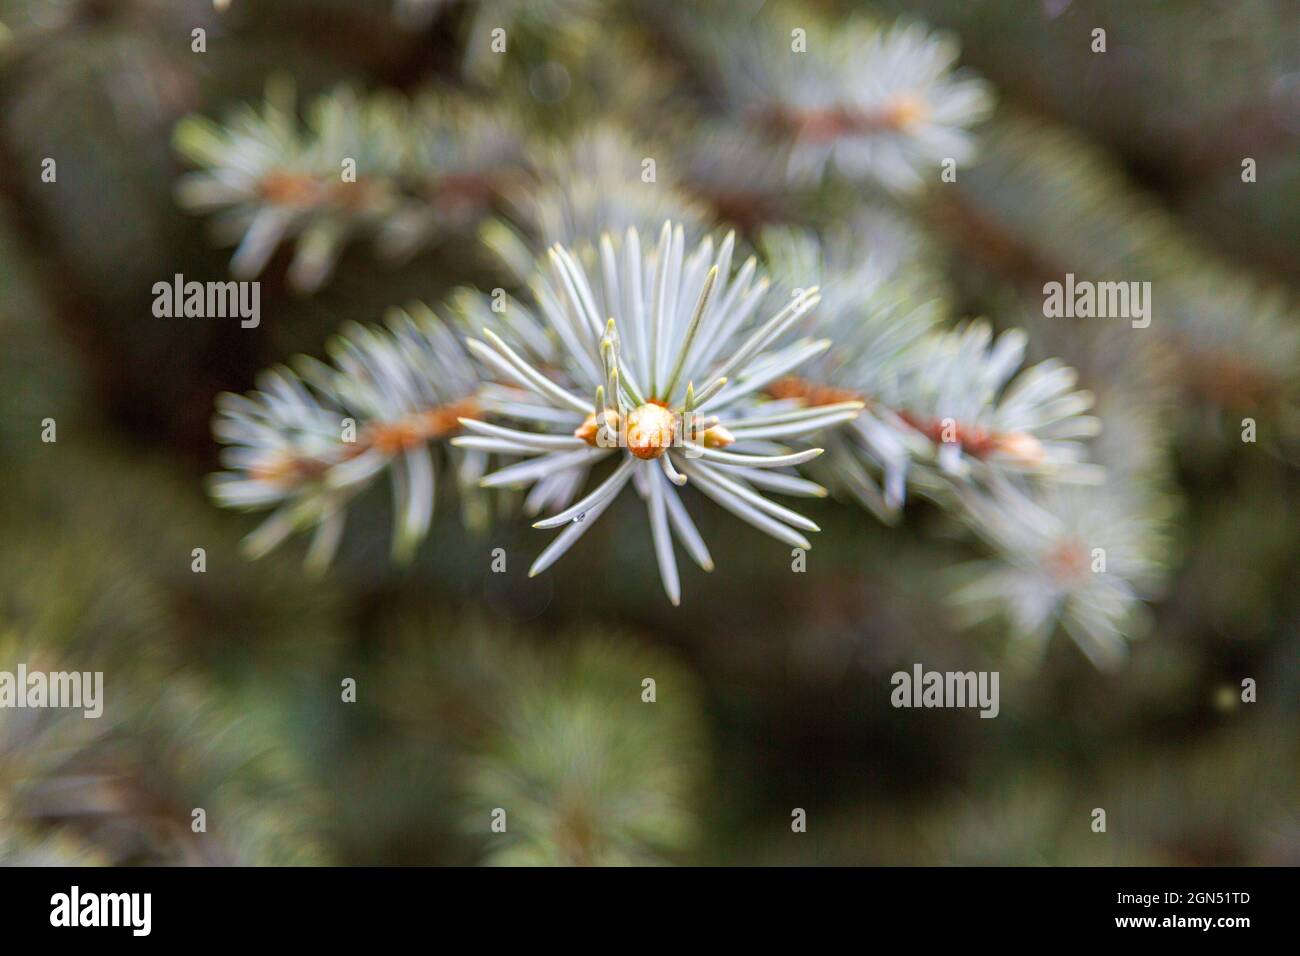 Colorado Blue Spruce Branch and Needles Closeup. New growth on blue spruce branch with radiating needles against a blurry background. Stock Photo